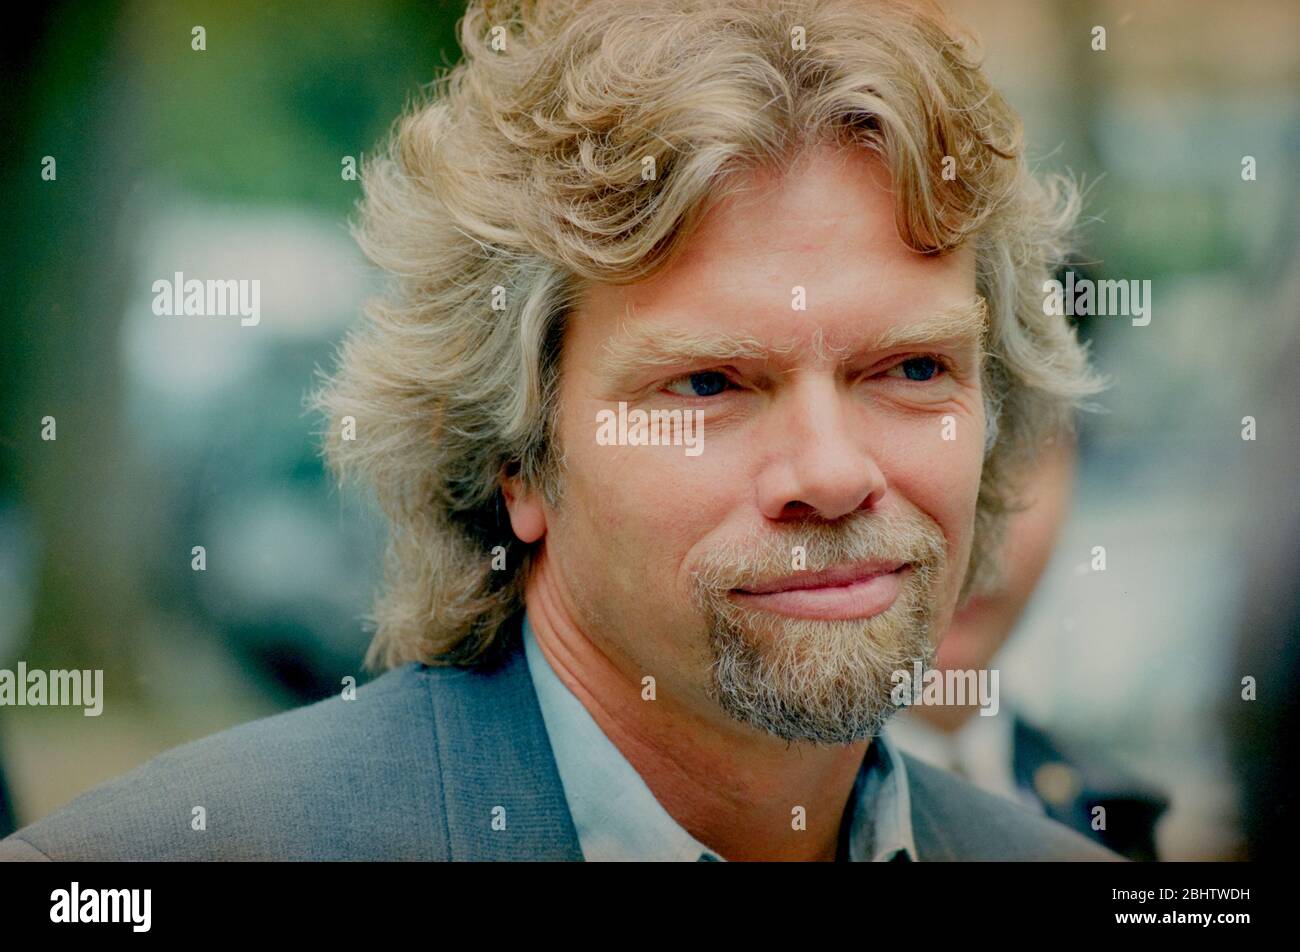 https://c8.alamy.com/comp/2BHTWDH/a-young-richard-branson-in-1993-on-the-day-that-british-airways-chief-executive-sir-colin-marshall-visited-him-in-londons-holland-park-for-talks-2BHTWDH.jpg